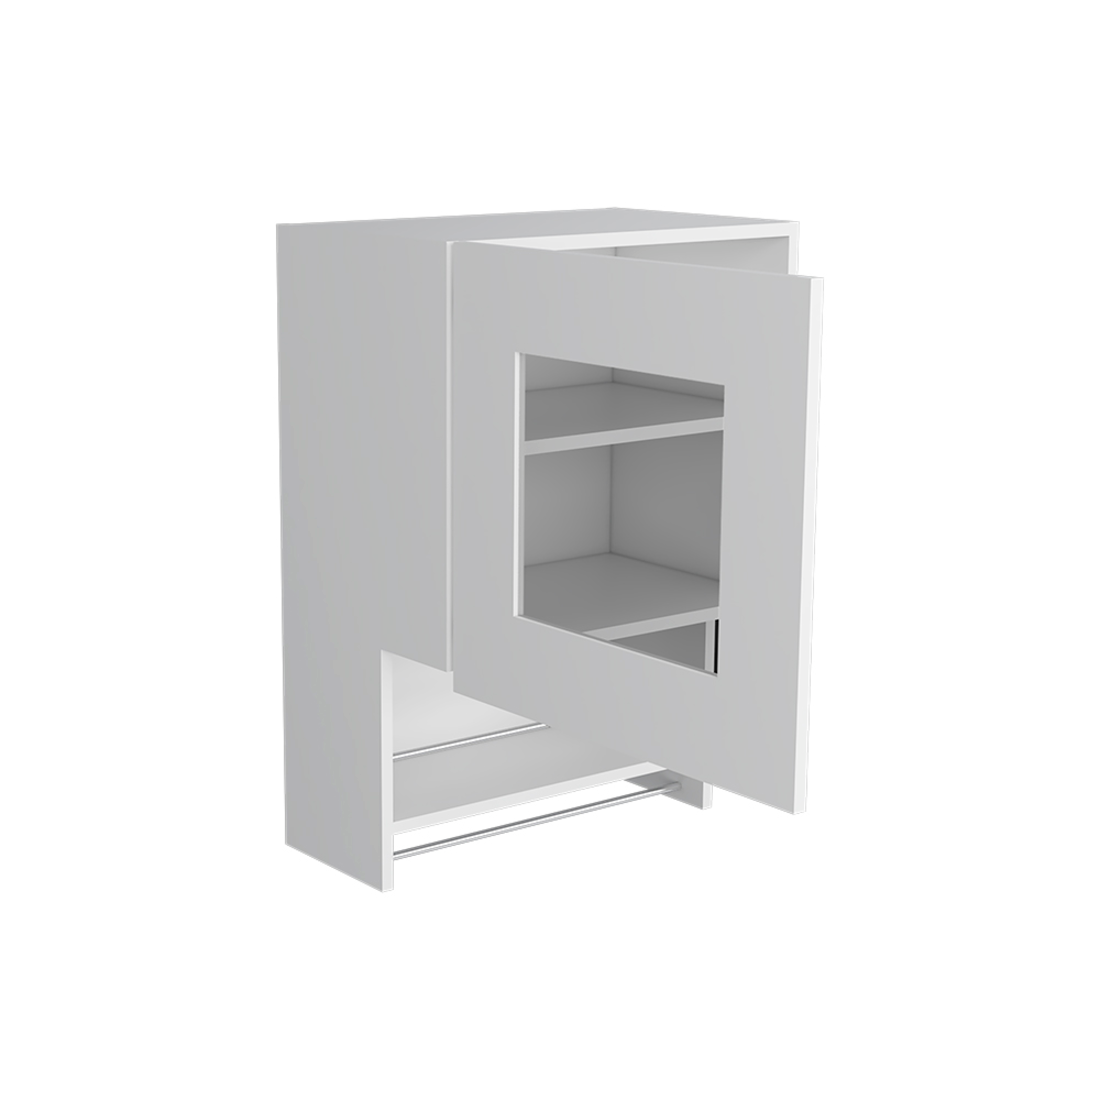 20" White Wall mounted Accent Cabinet With One Shelf